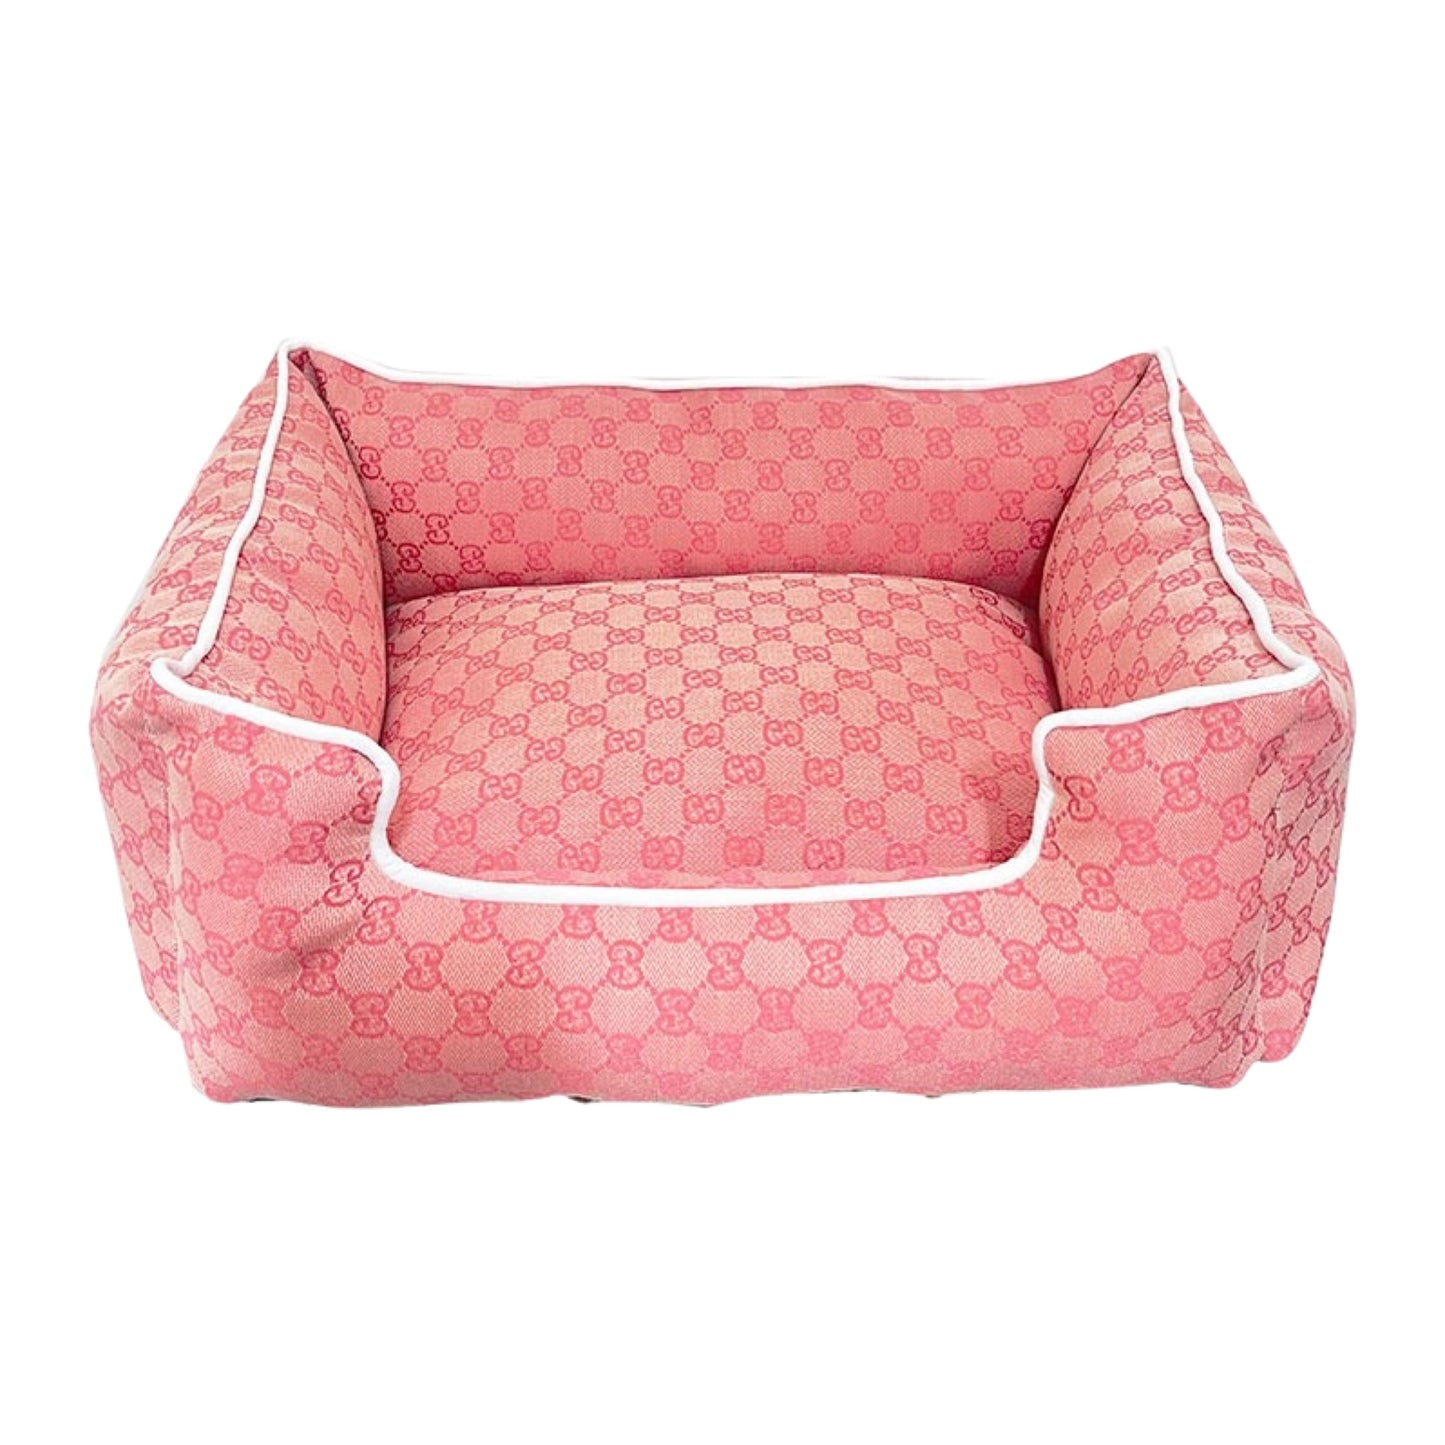 Gucci Puppy Bed